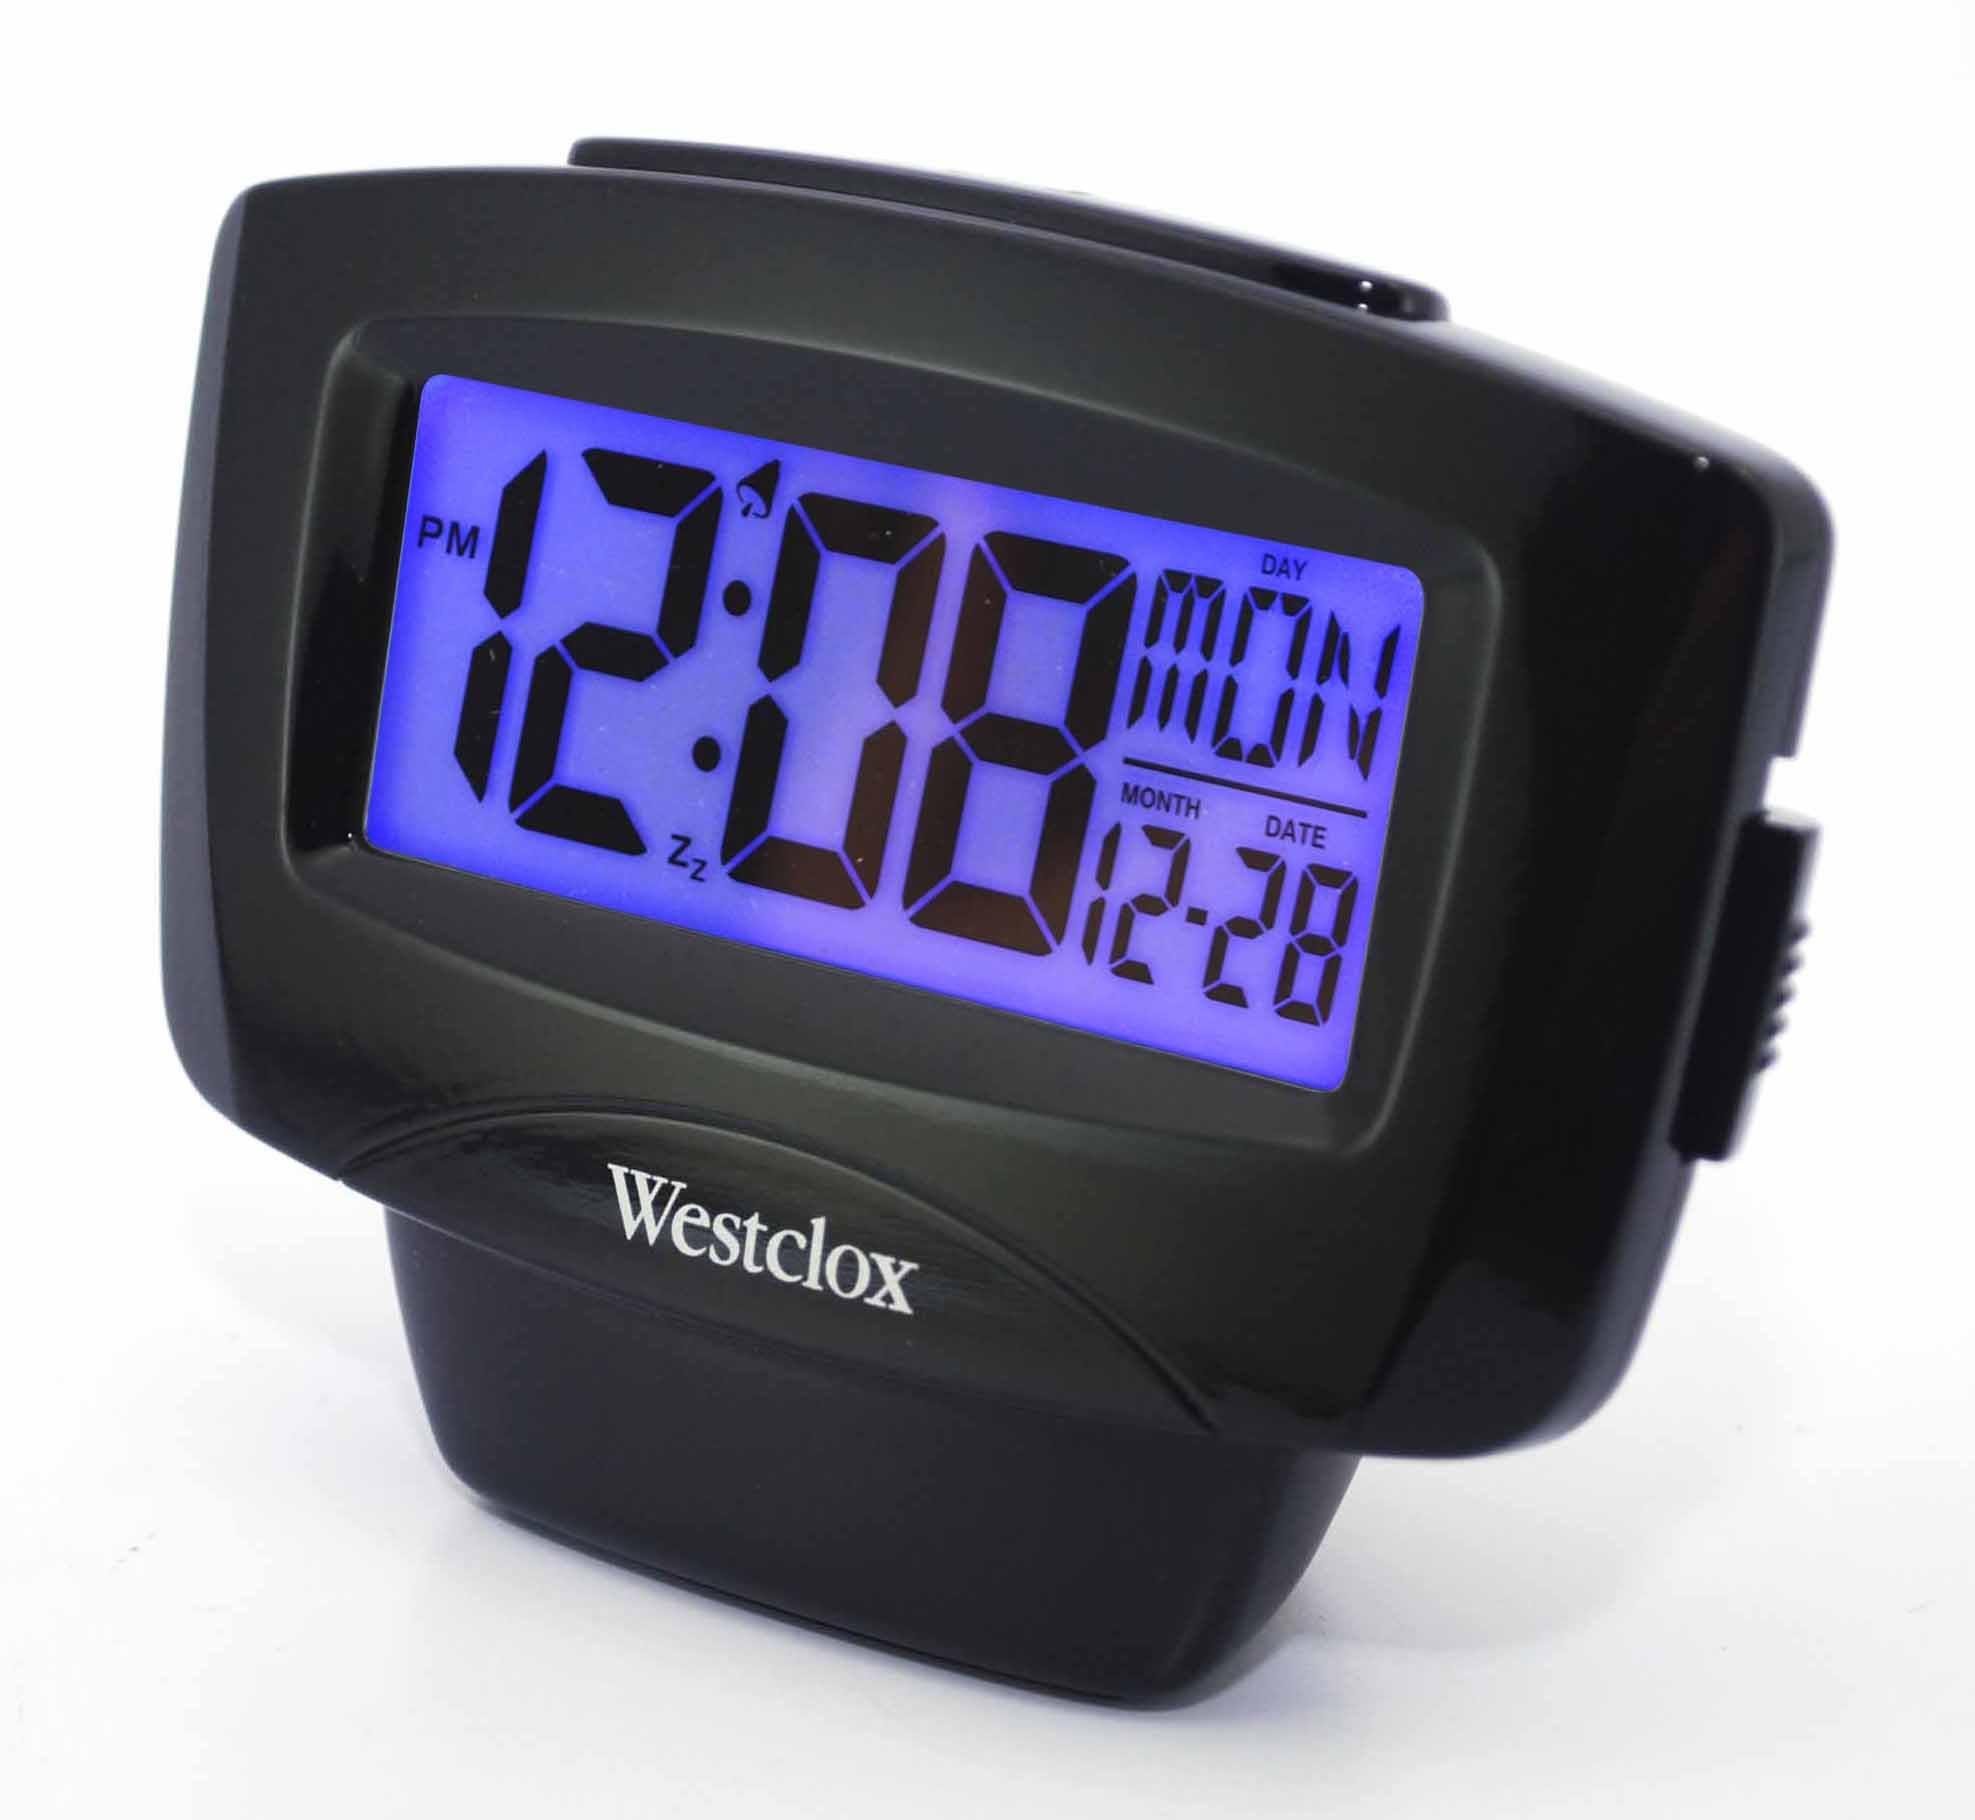 WESTCLOX 72020 Large Easy to Read LCD Alarm Clock with Day/Date